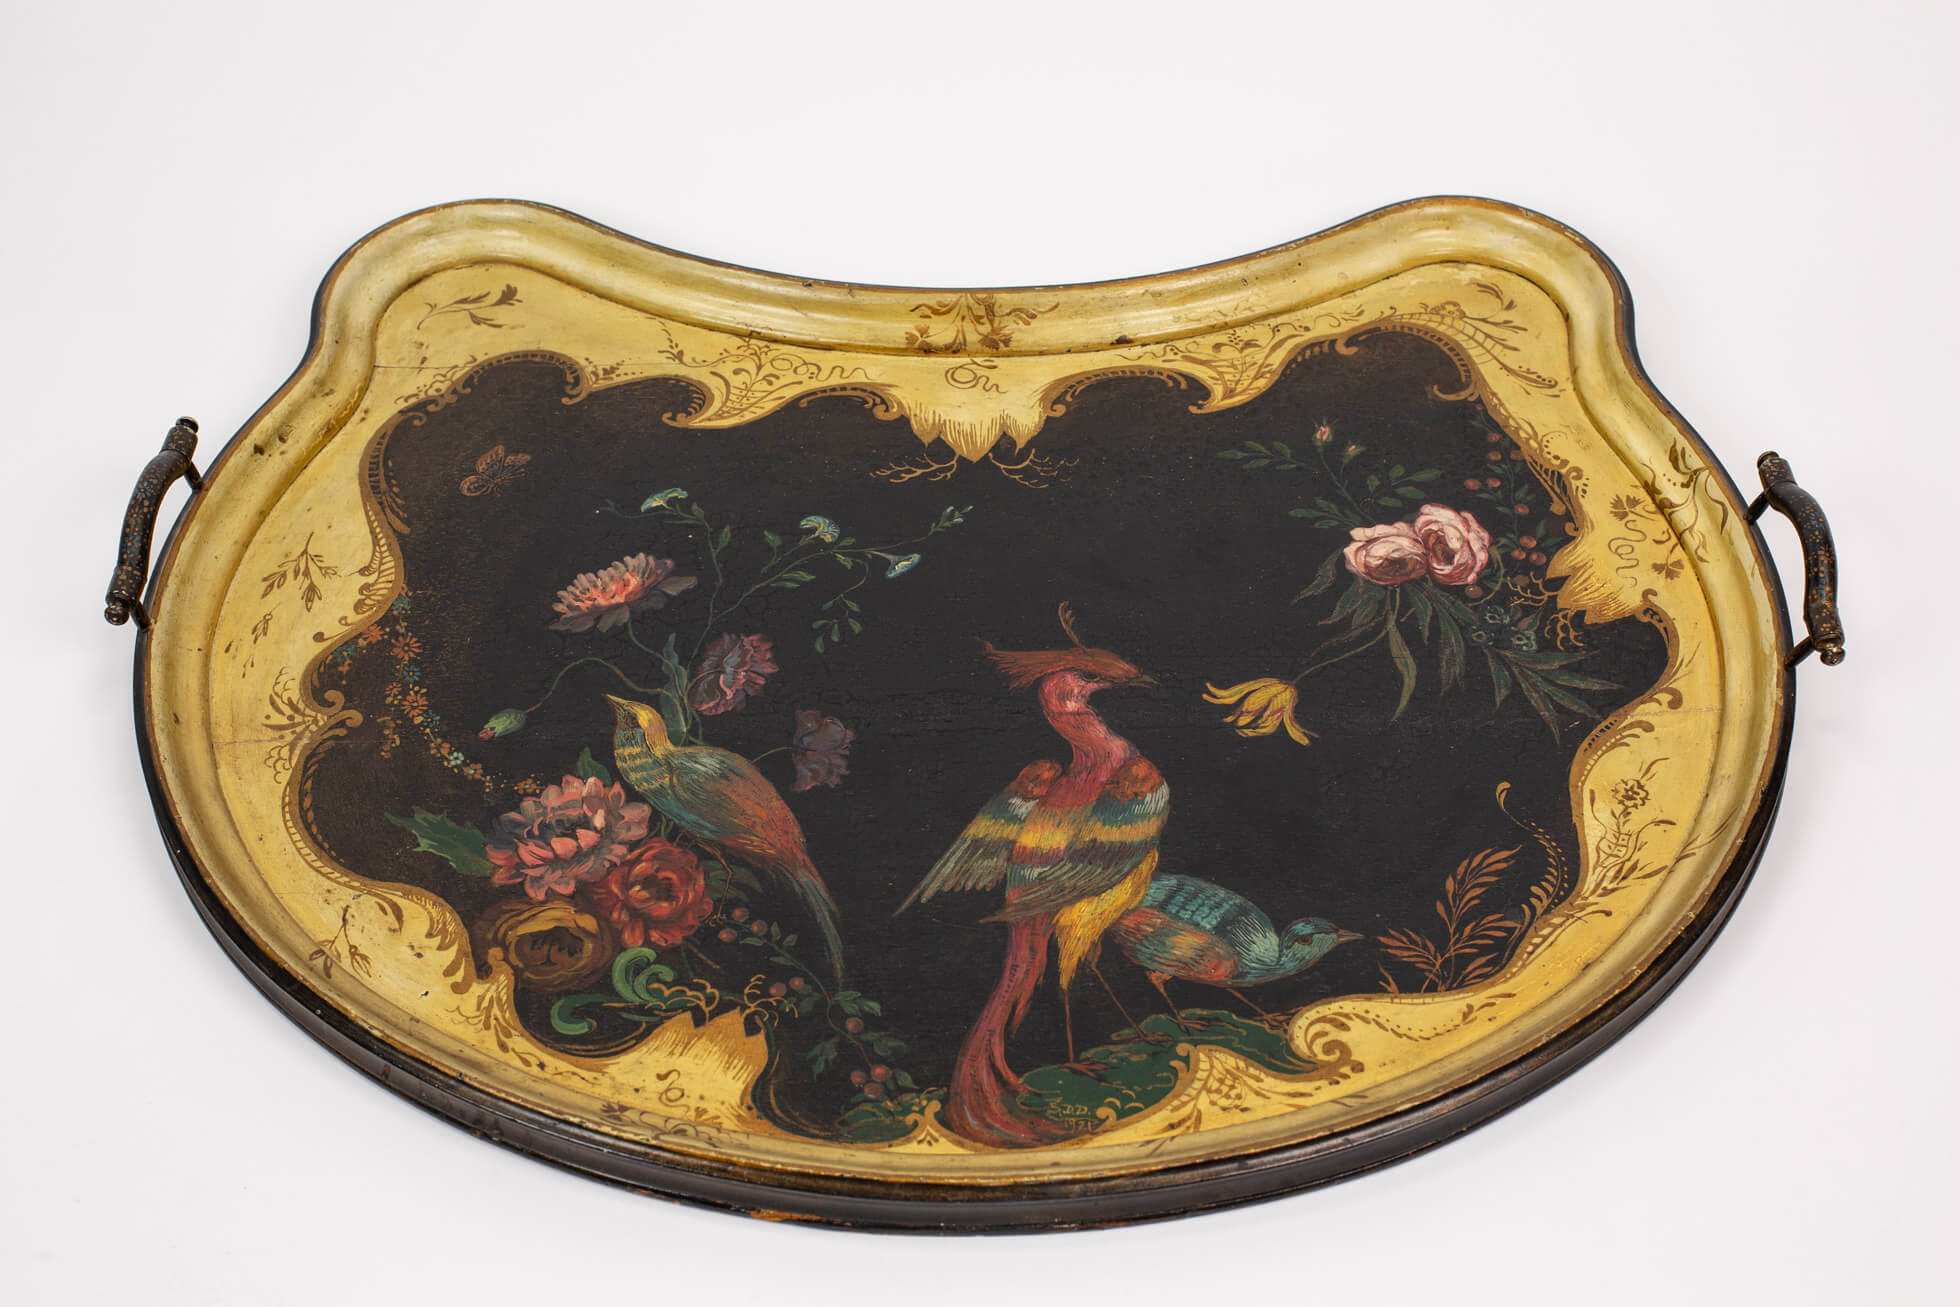 Sophie Pemberton, Serving tray with hand-painted decoration, 1921